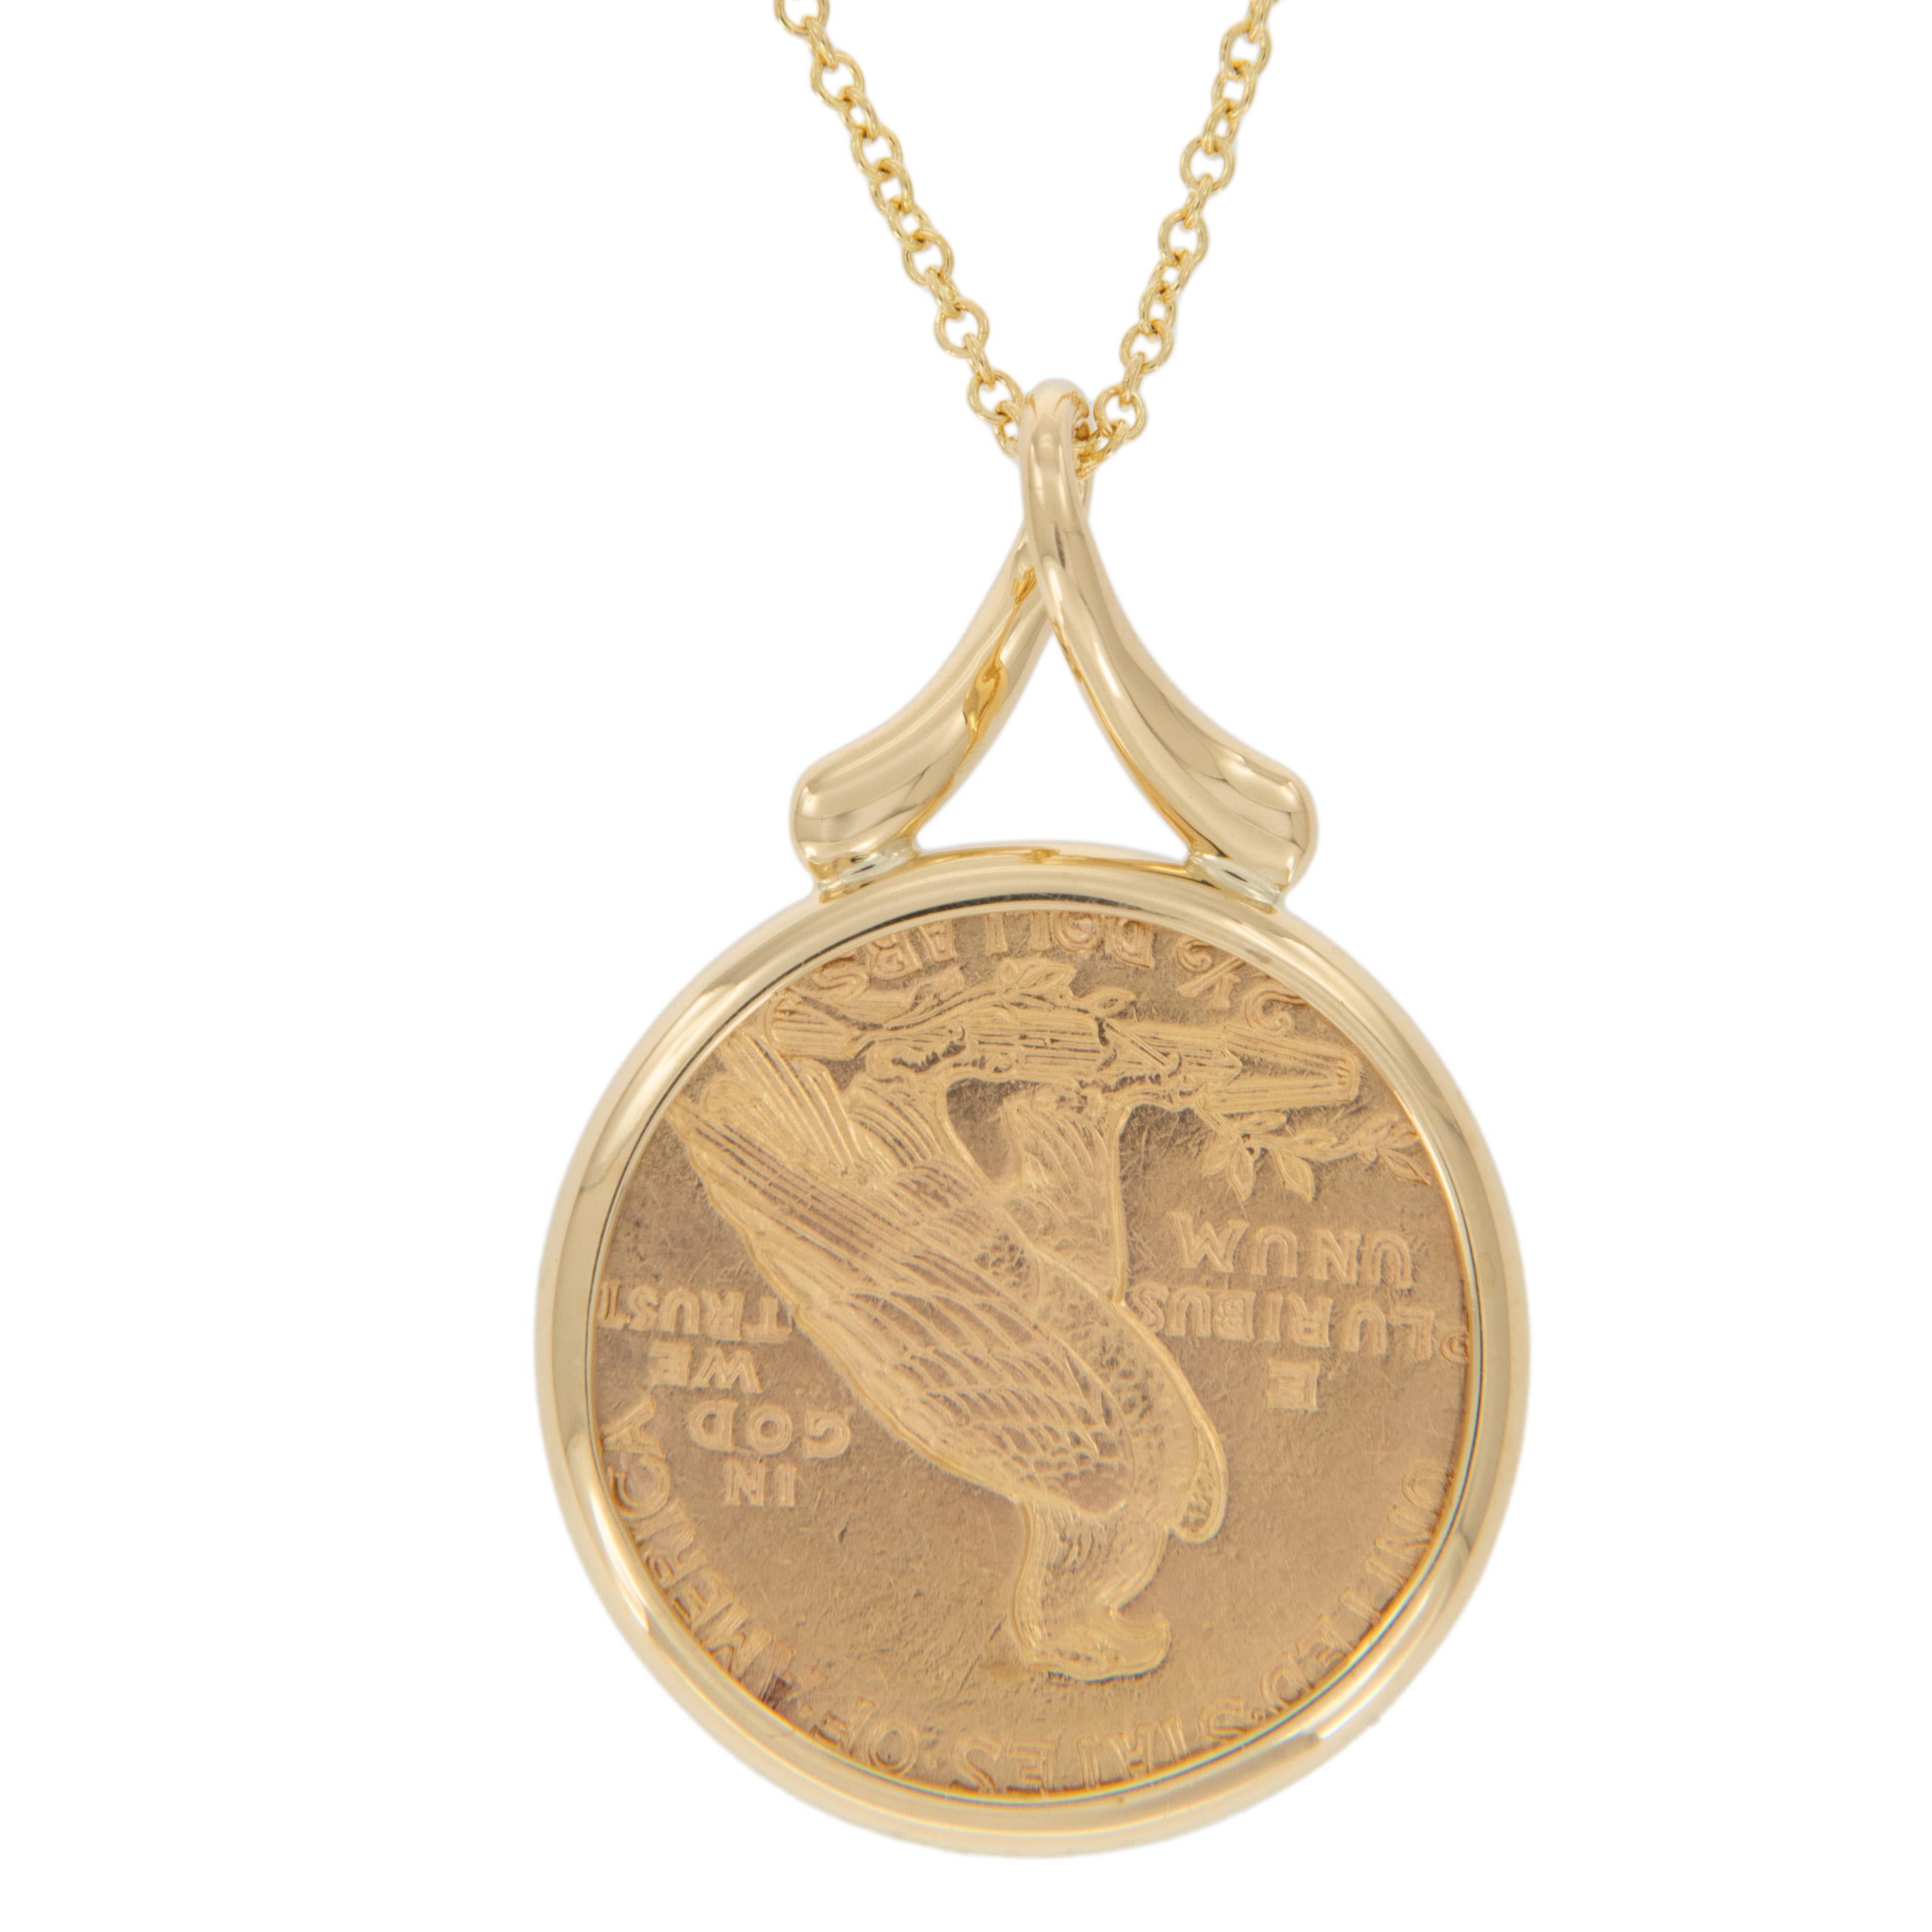 Enjoy a piece of American gold coin history! This 1913 $2.50 Indian head quarter eagle coin is framed by designer Michael Bondanza in 18k yellow gold and suspends from a diamond accented ribbon-style bail on a 16-inch chain. Pendant measures 27.5mm